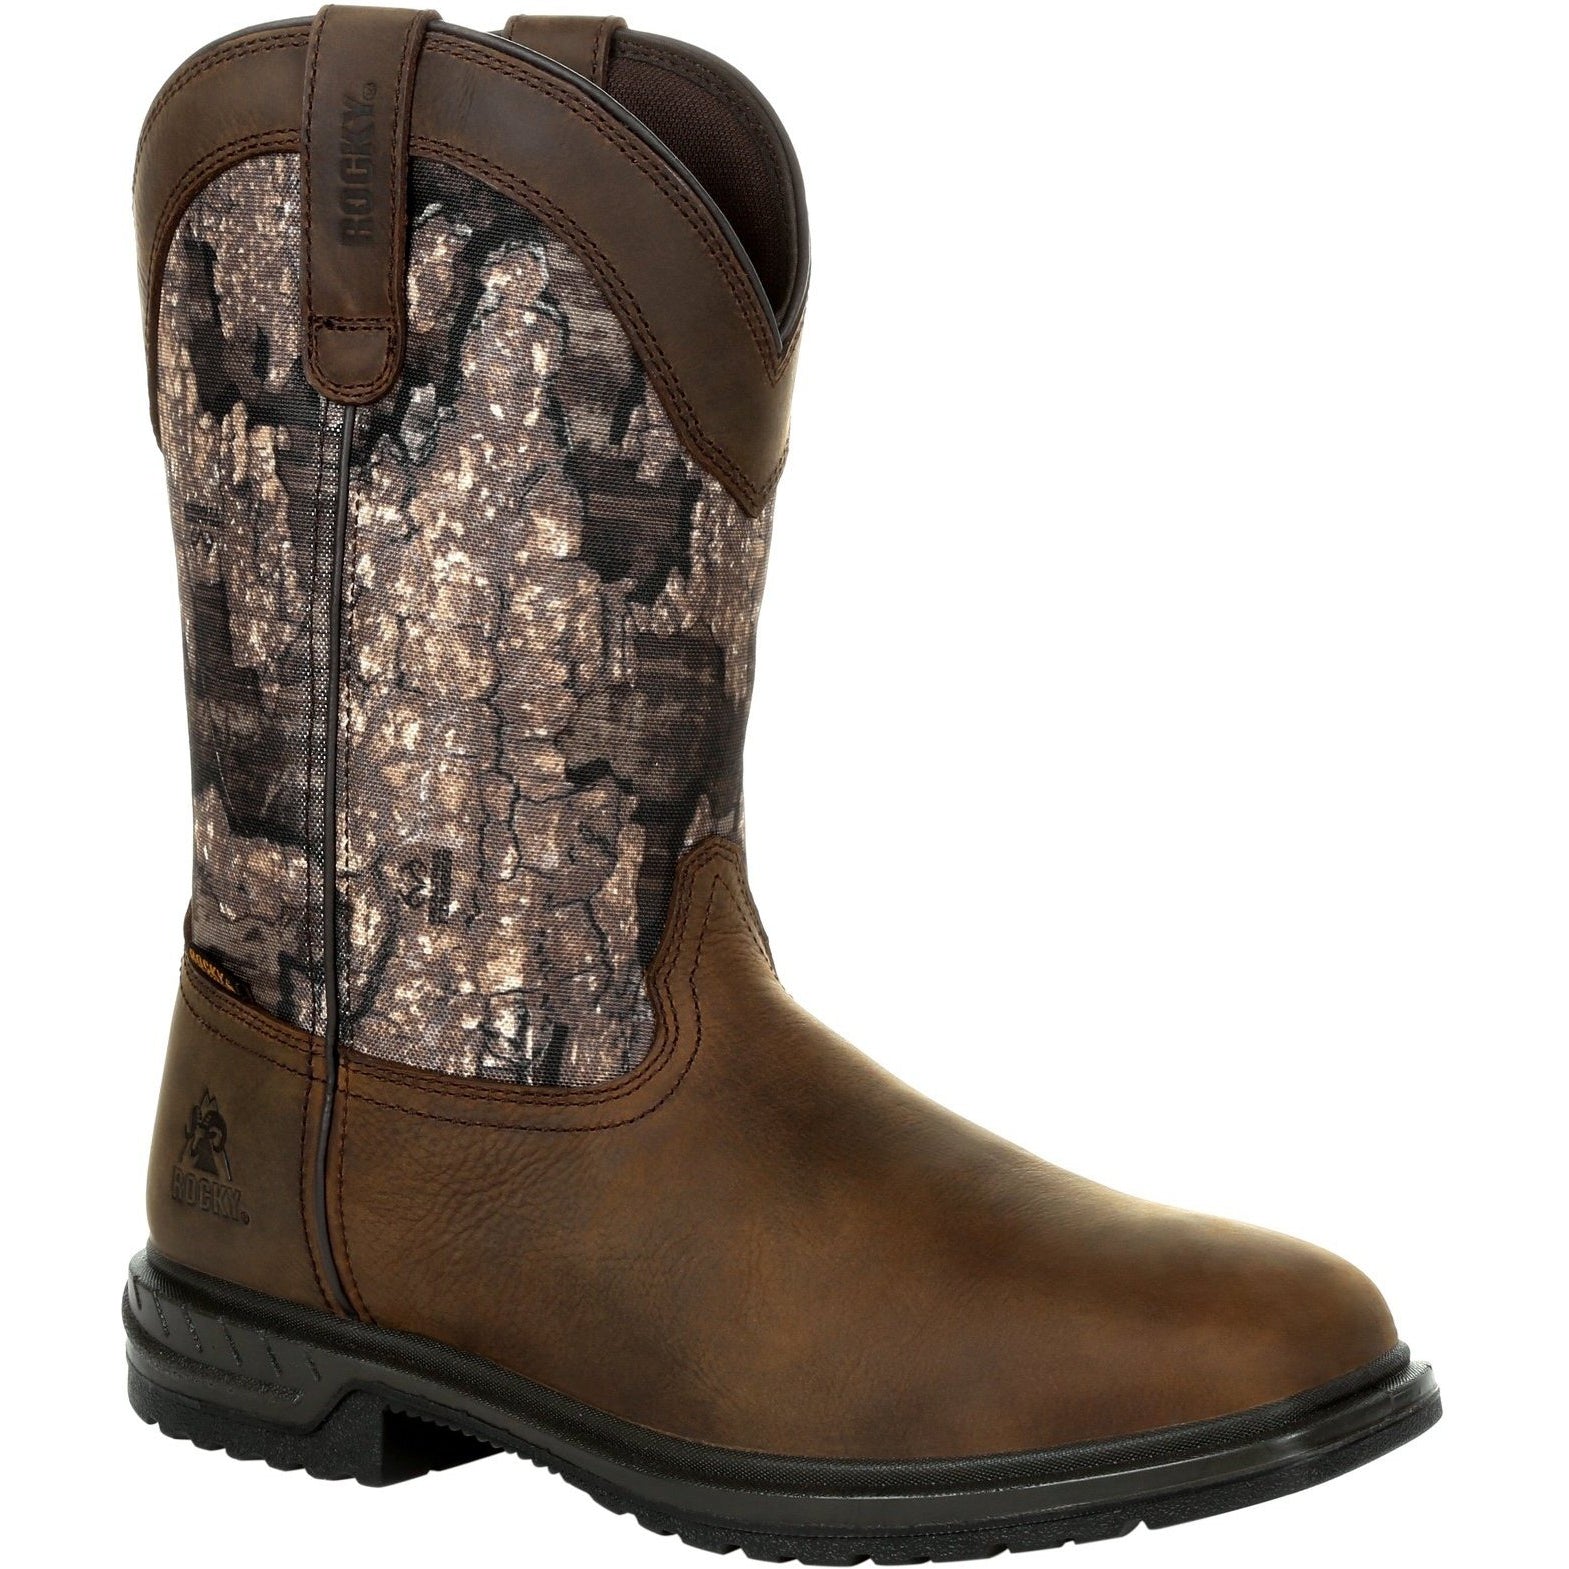 Rocky Men's Worksmart 11" Square Toe WP 400G Ins Western Work Boot RKW0326 7 / Medium / Realtree Timber - Overlook Boots